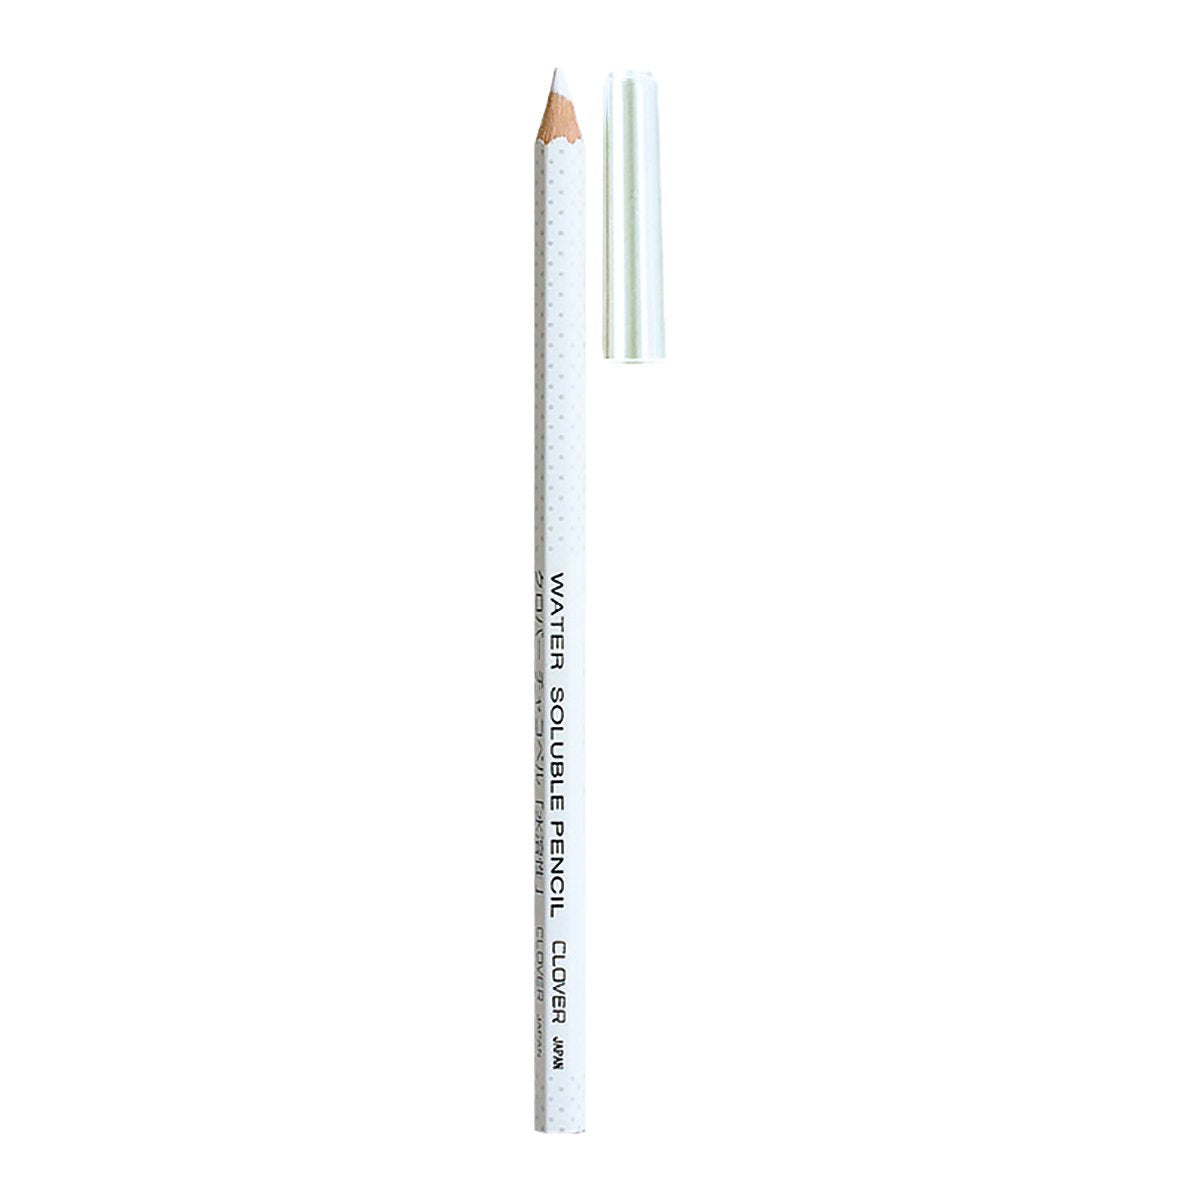 Fabric Pen  Clover White Marking Pen, Removable Like Fabric Pencil